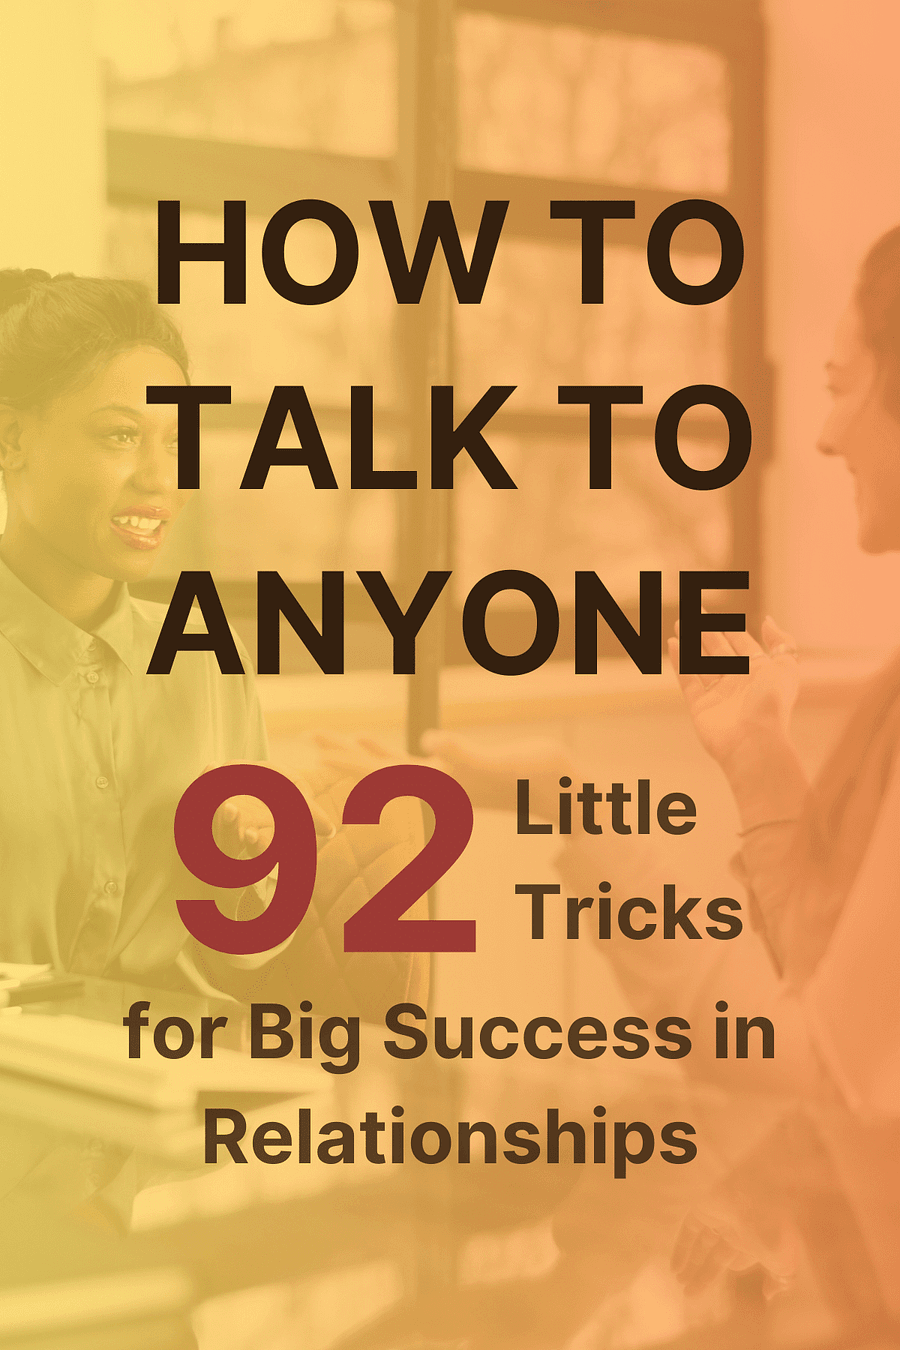 How to Talk to Anyone by Leil Lowndes - Book Summary